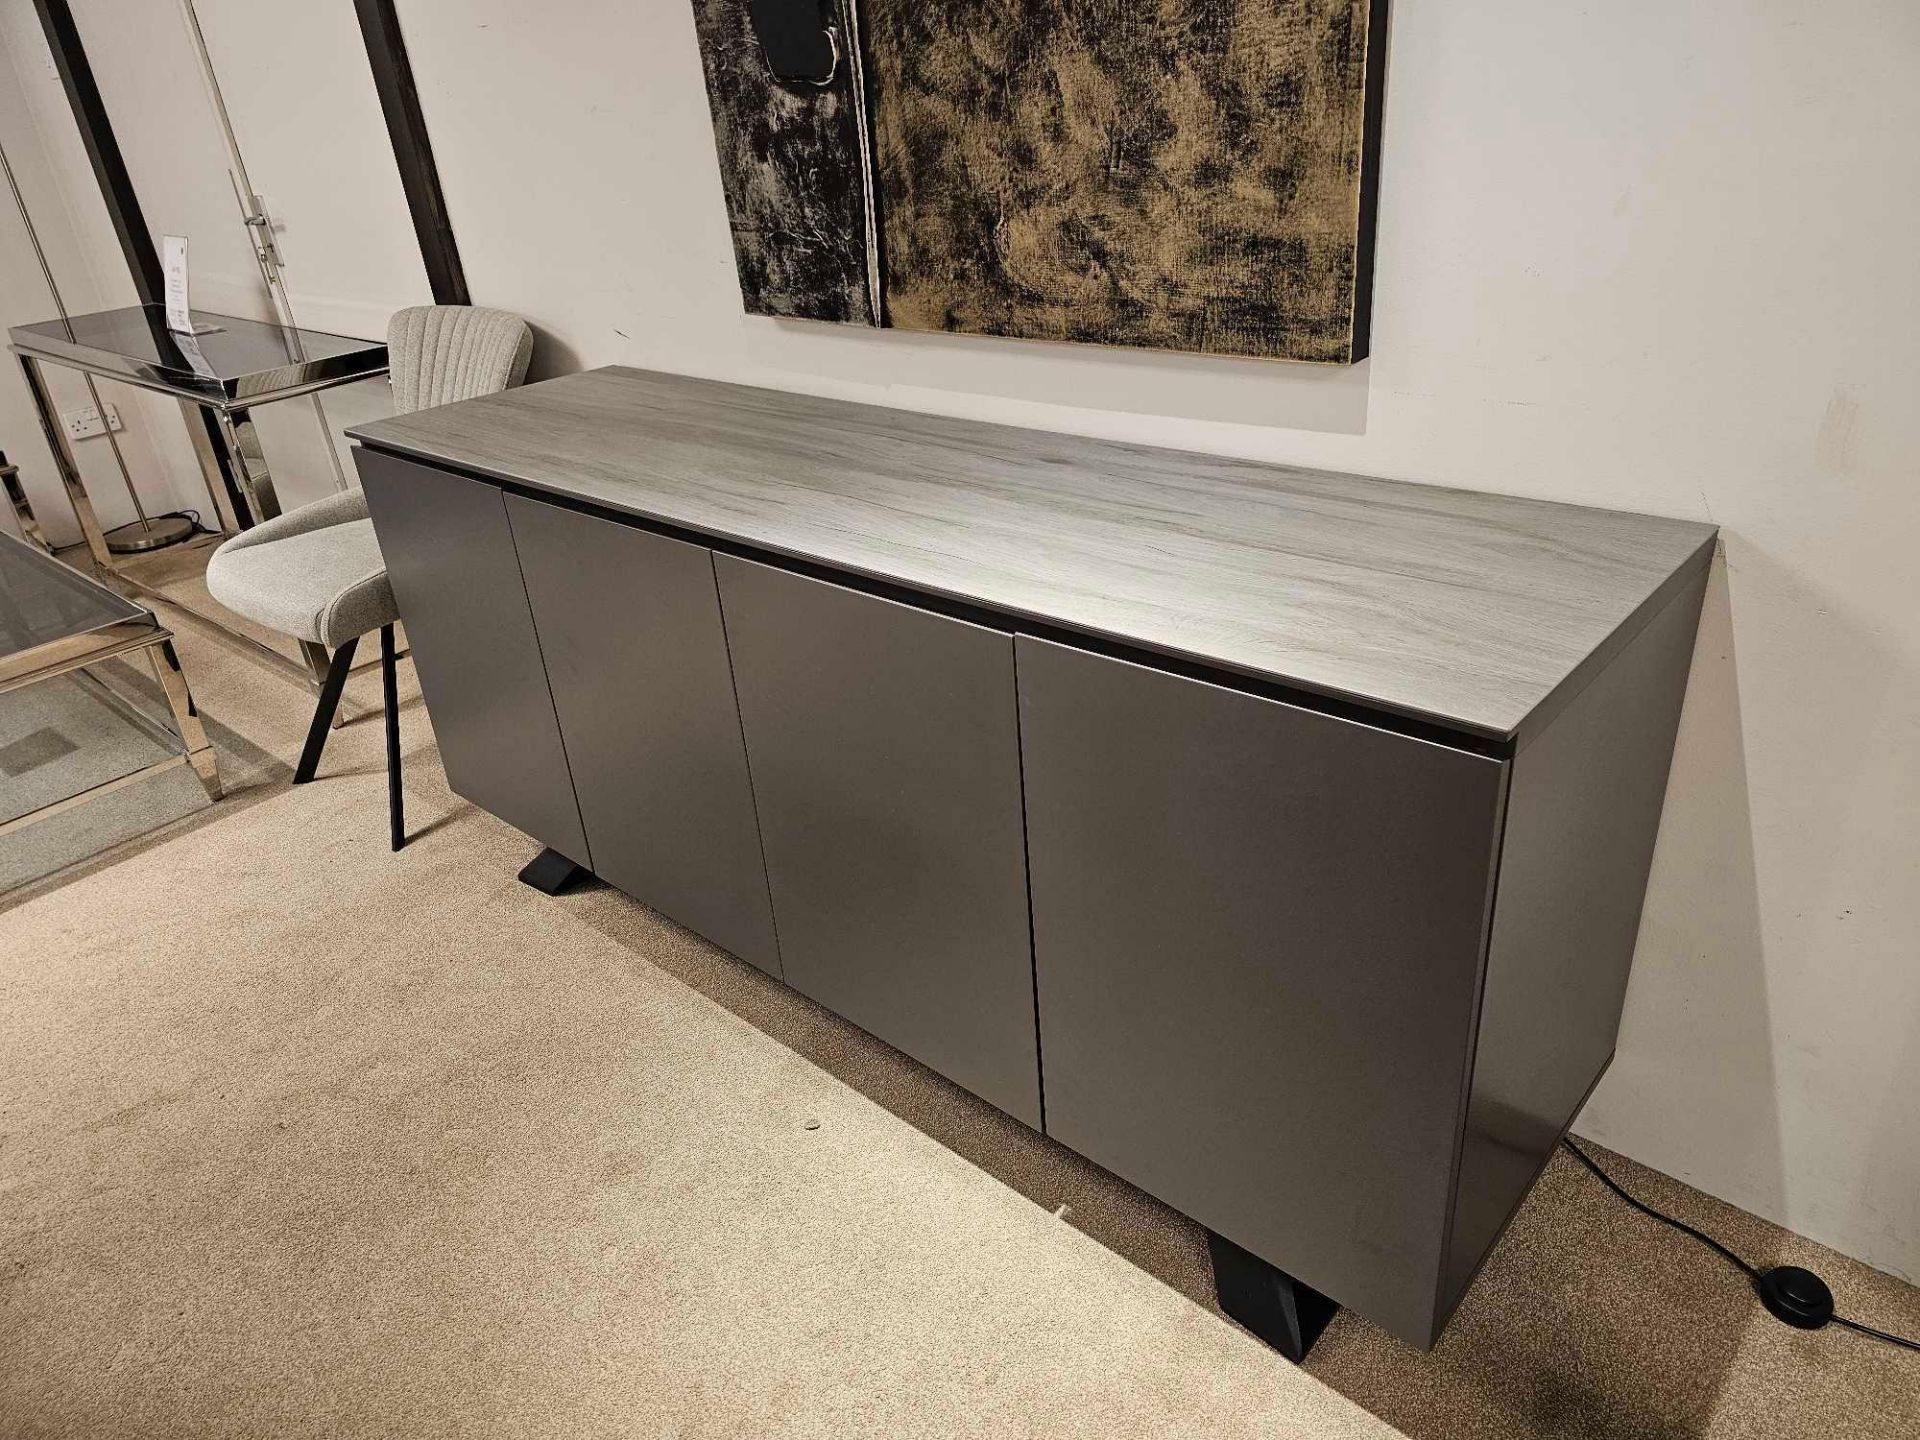 Spartan Sideboard by Kesterport The Spartan Four Door Sideboard provides is striking as a stand - Bild 7 aus 8